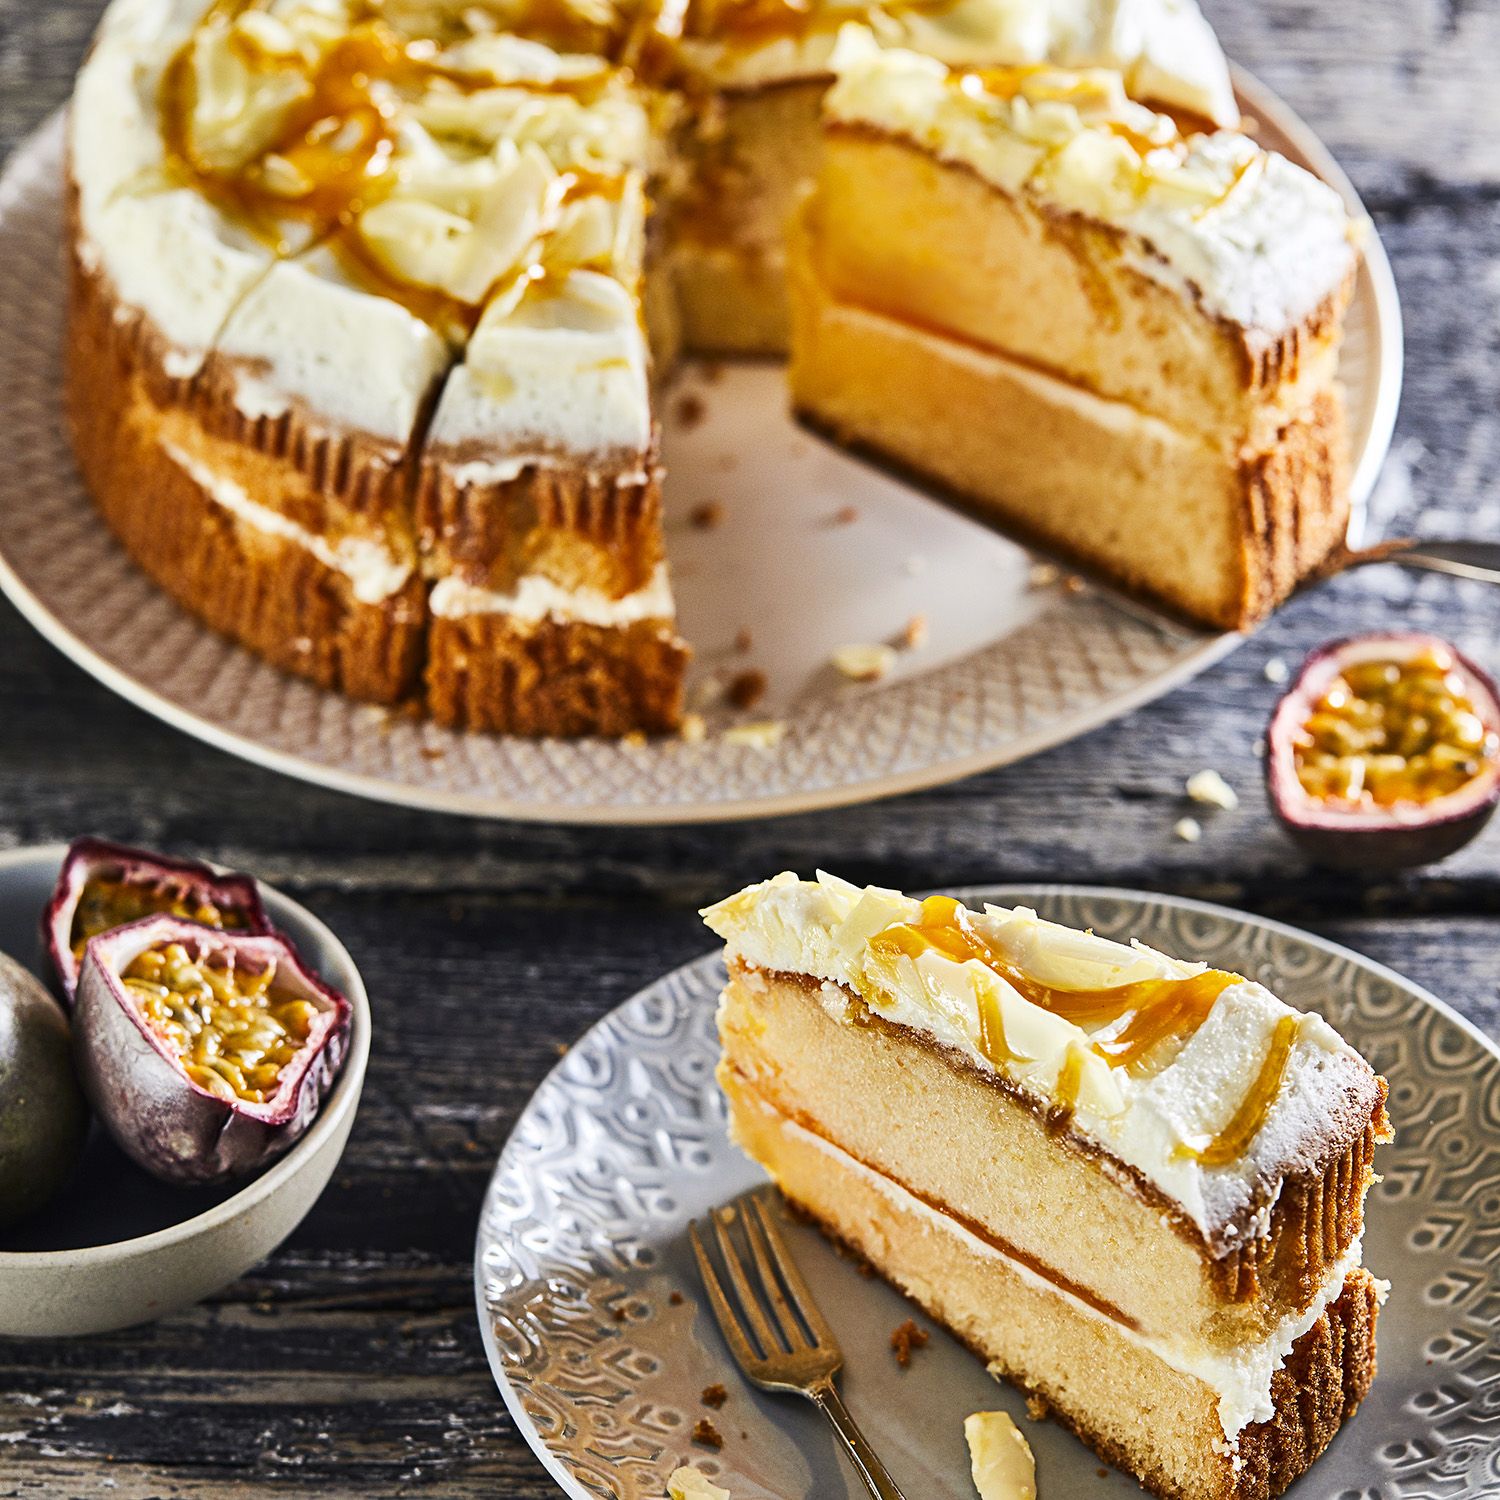 Chefs’ Selections Passionfruit & White Chocolate Cake (1 x 16p/ptn)